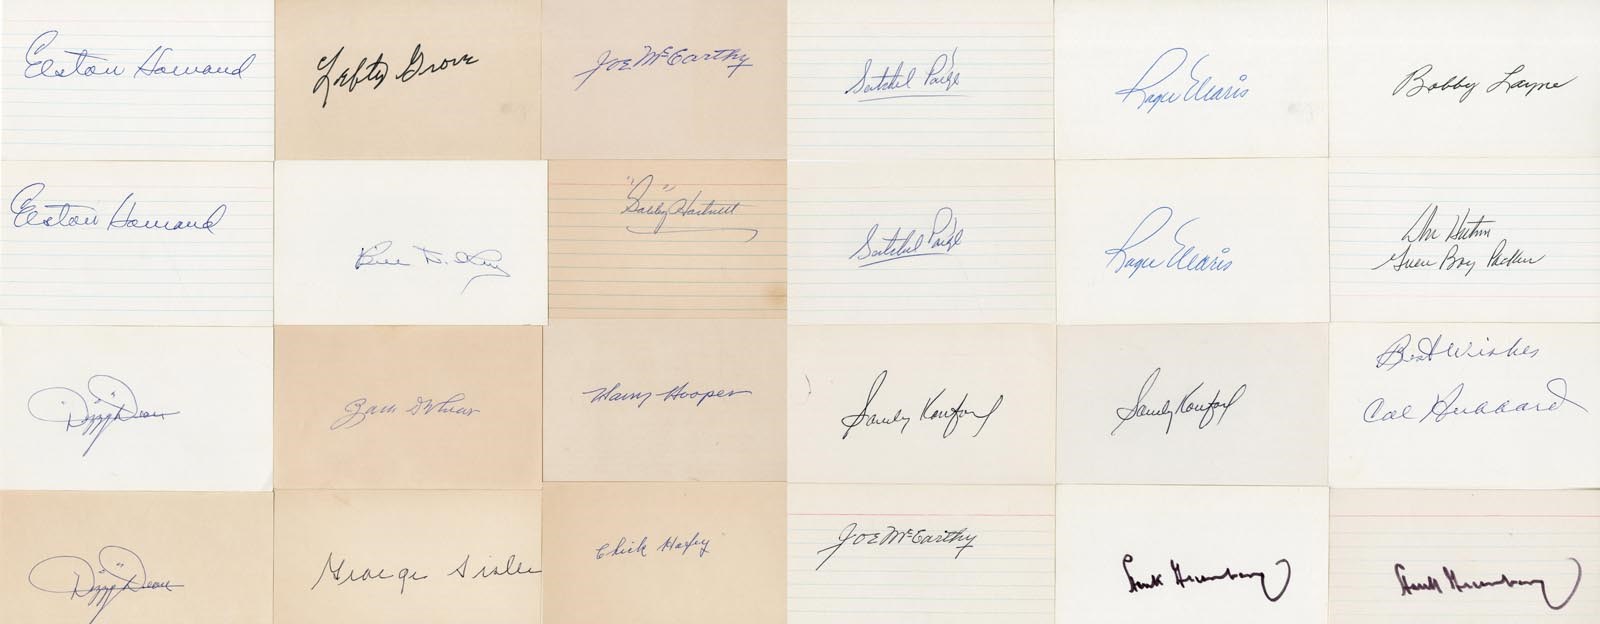 Baseball Autographs - Hall of Famers and Stars Signed Index Card Collection with Major Stars (125+)